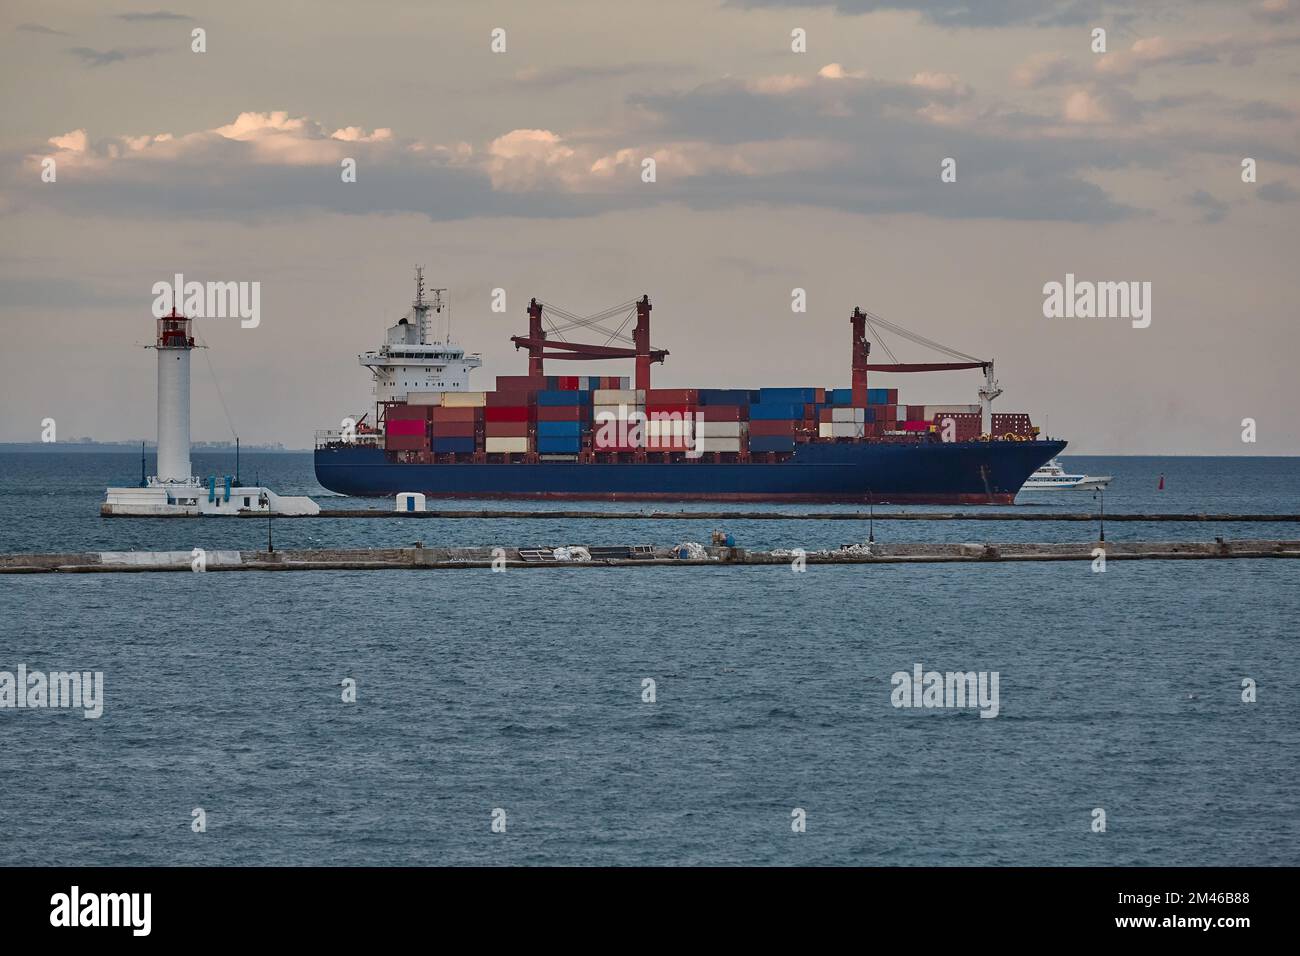 A large merchant ship container vessel in coastal waters of ocean. A merchant ship is moving around sea in daytime Stock Photo